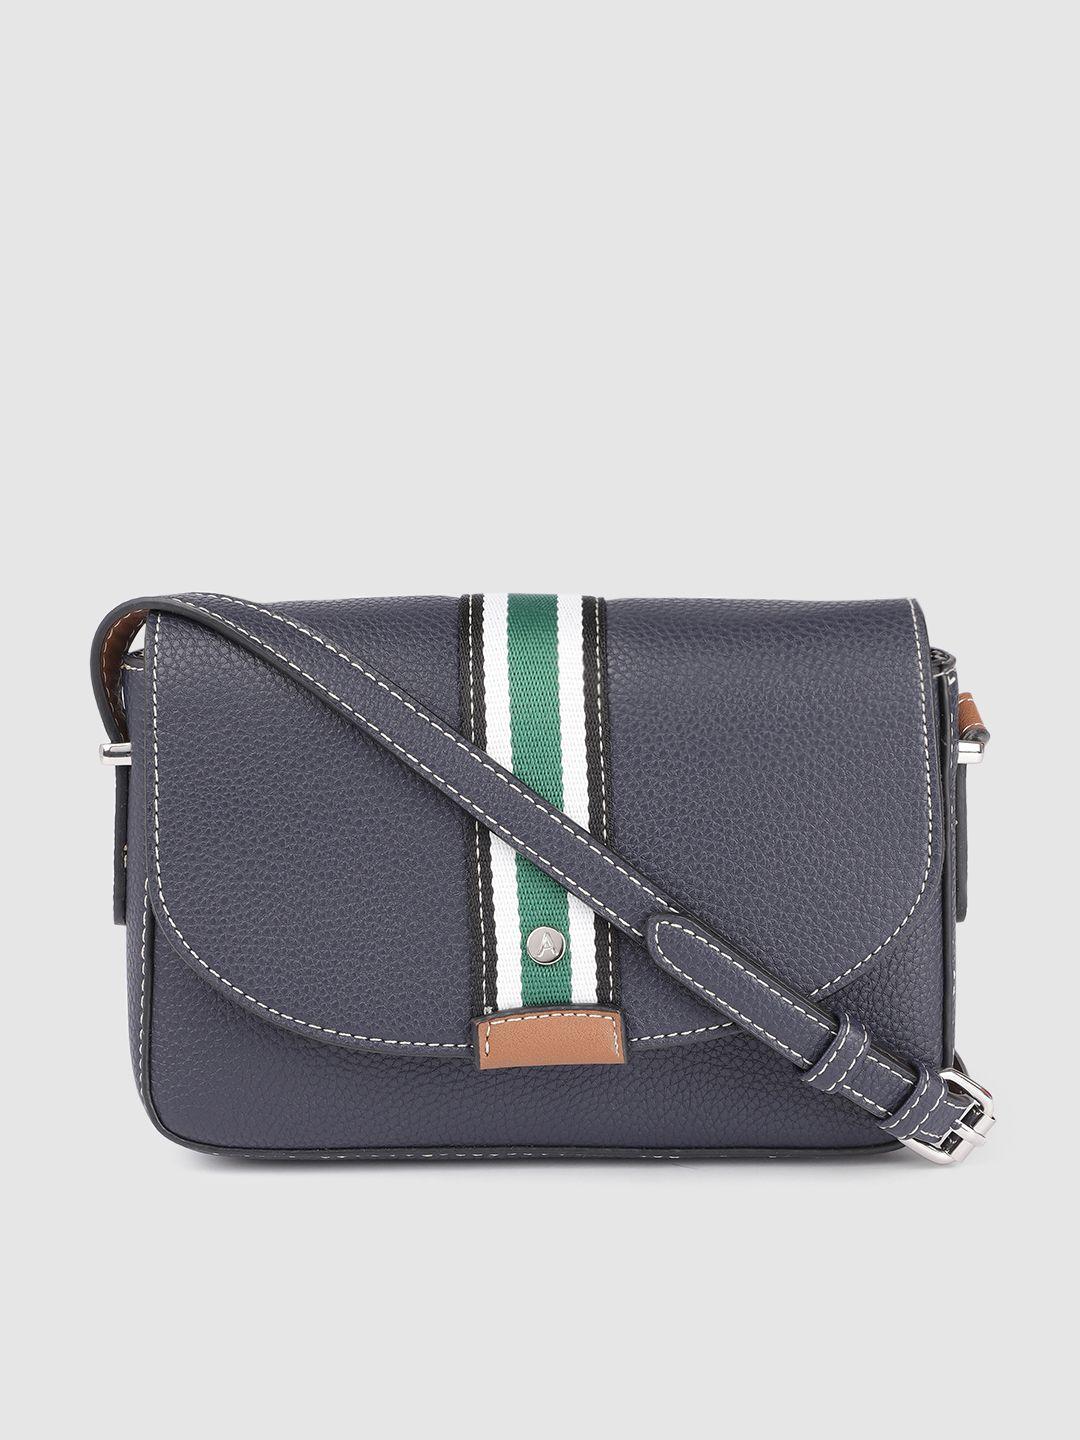 accessorize-women-navy-blue-solid-structured-sling-bag